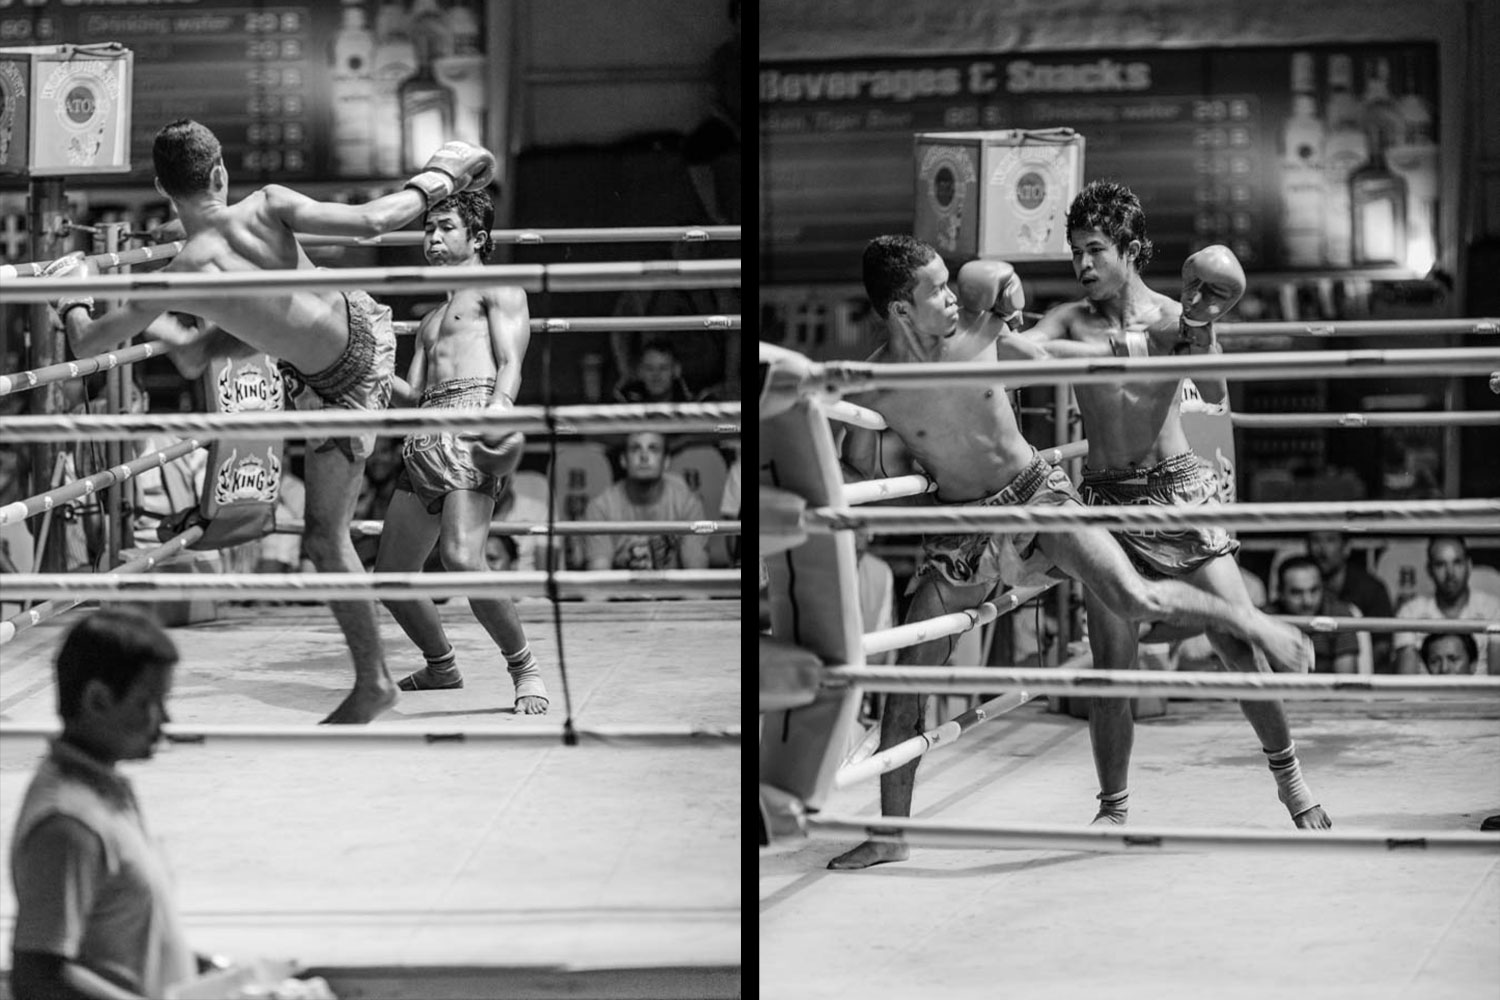 Boxing match in Phuket where fighters with powerful kicks fight it out